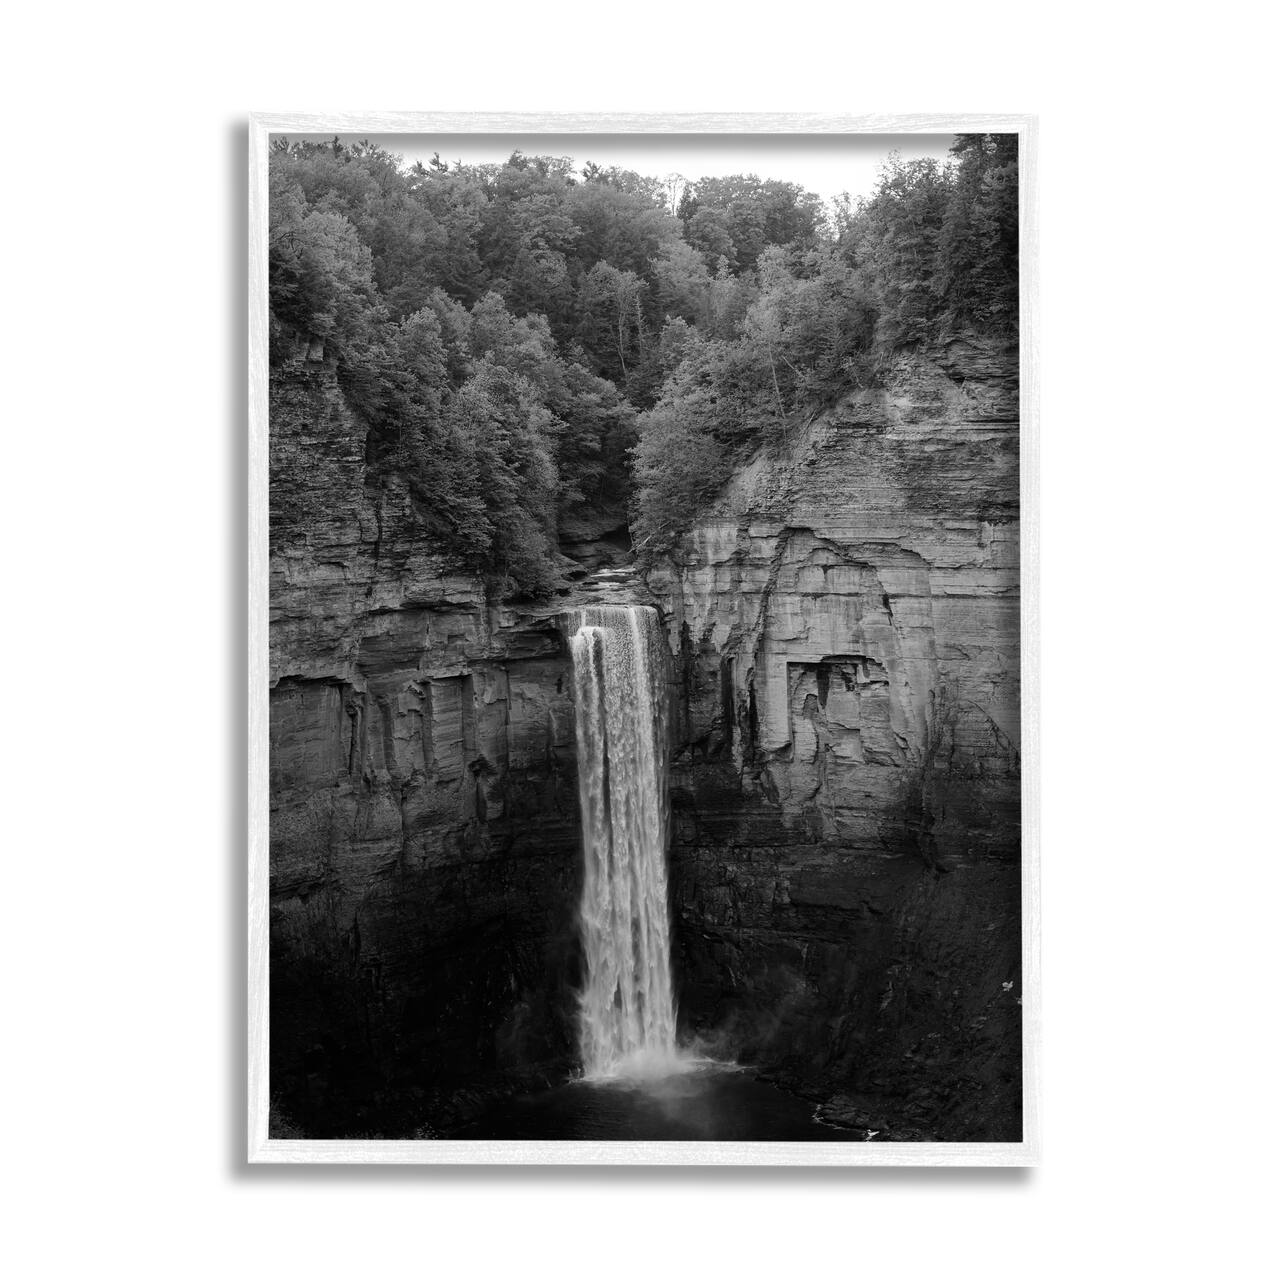 Stupell Industries Ithaca Cliffside Waterfall Black White Nature Landscape Photography Framed Wall Art